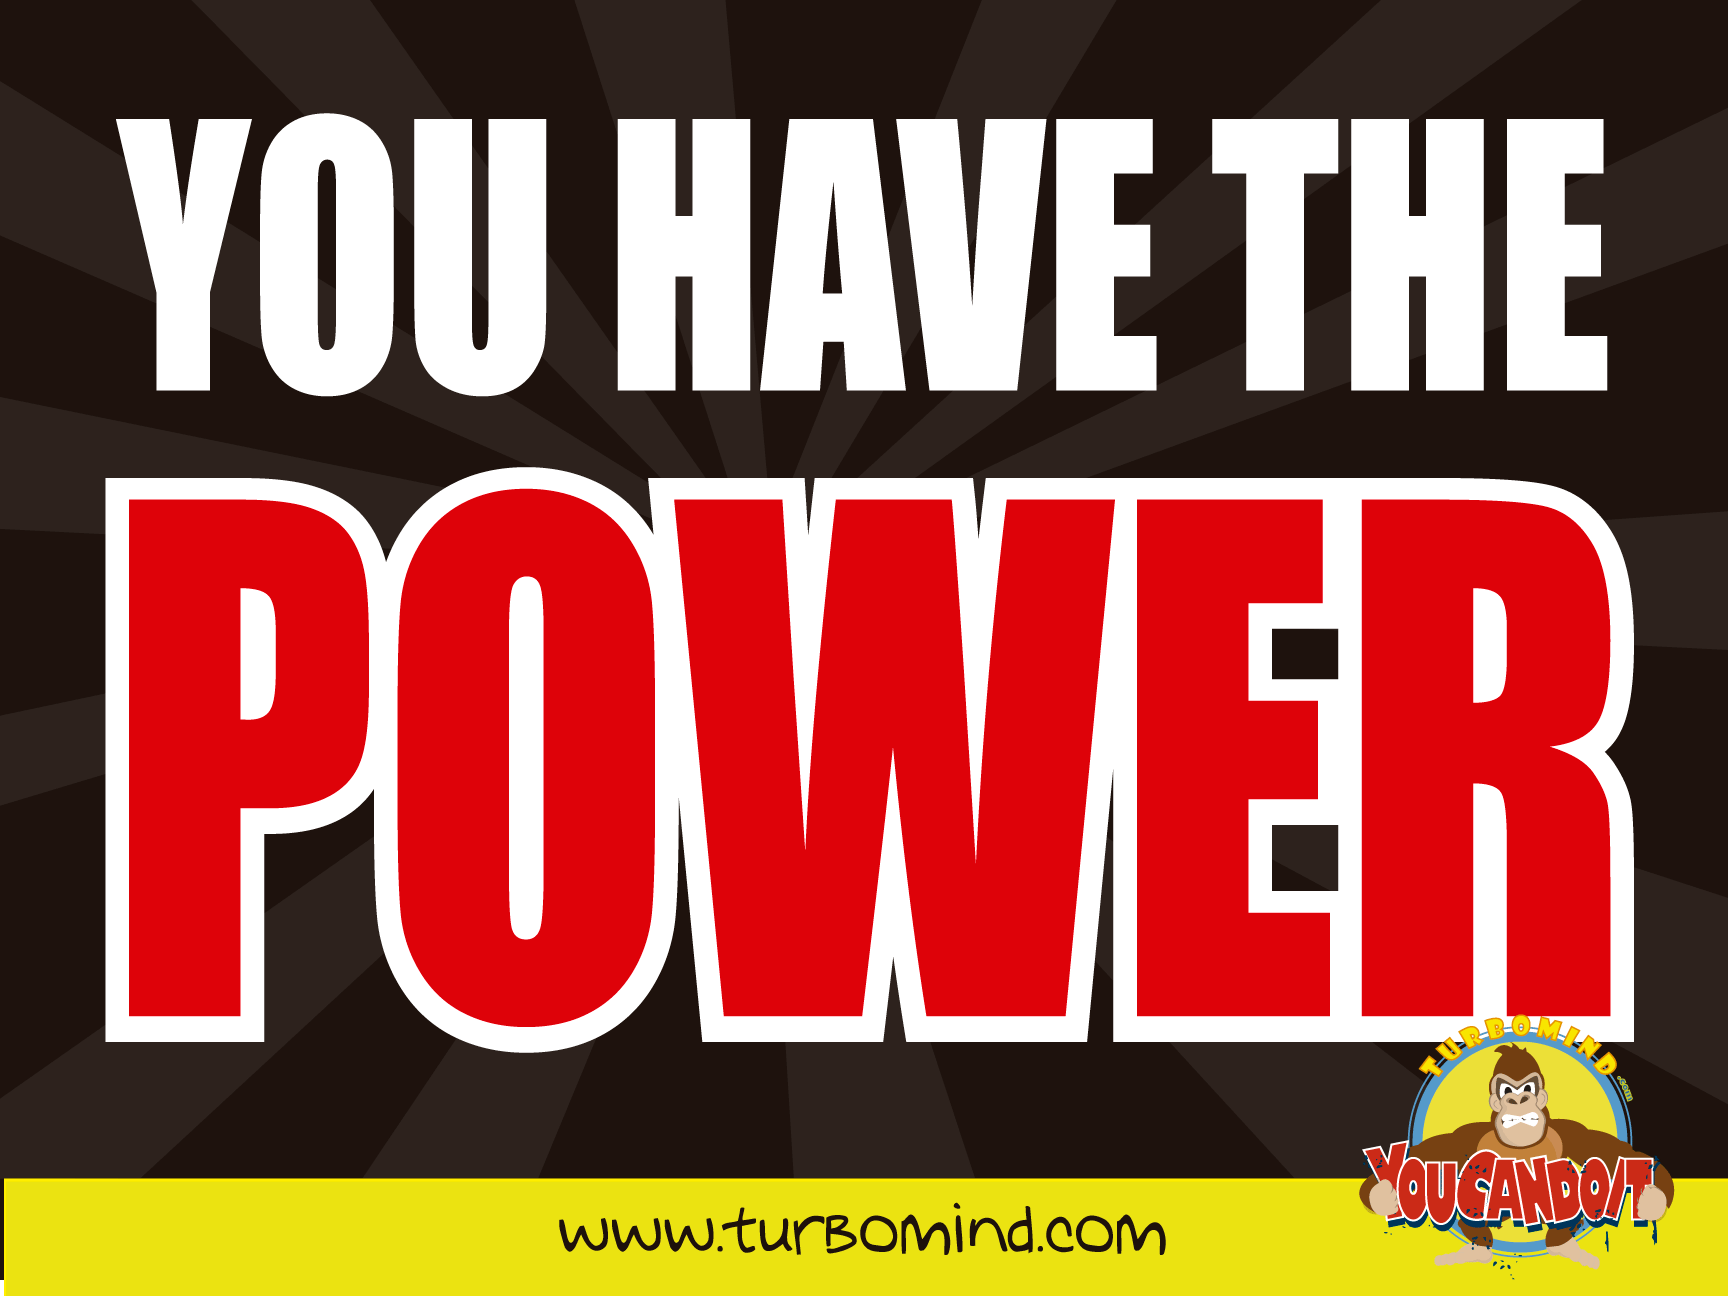 You have the Power, turbomind.com